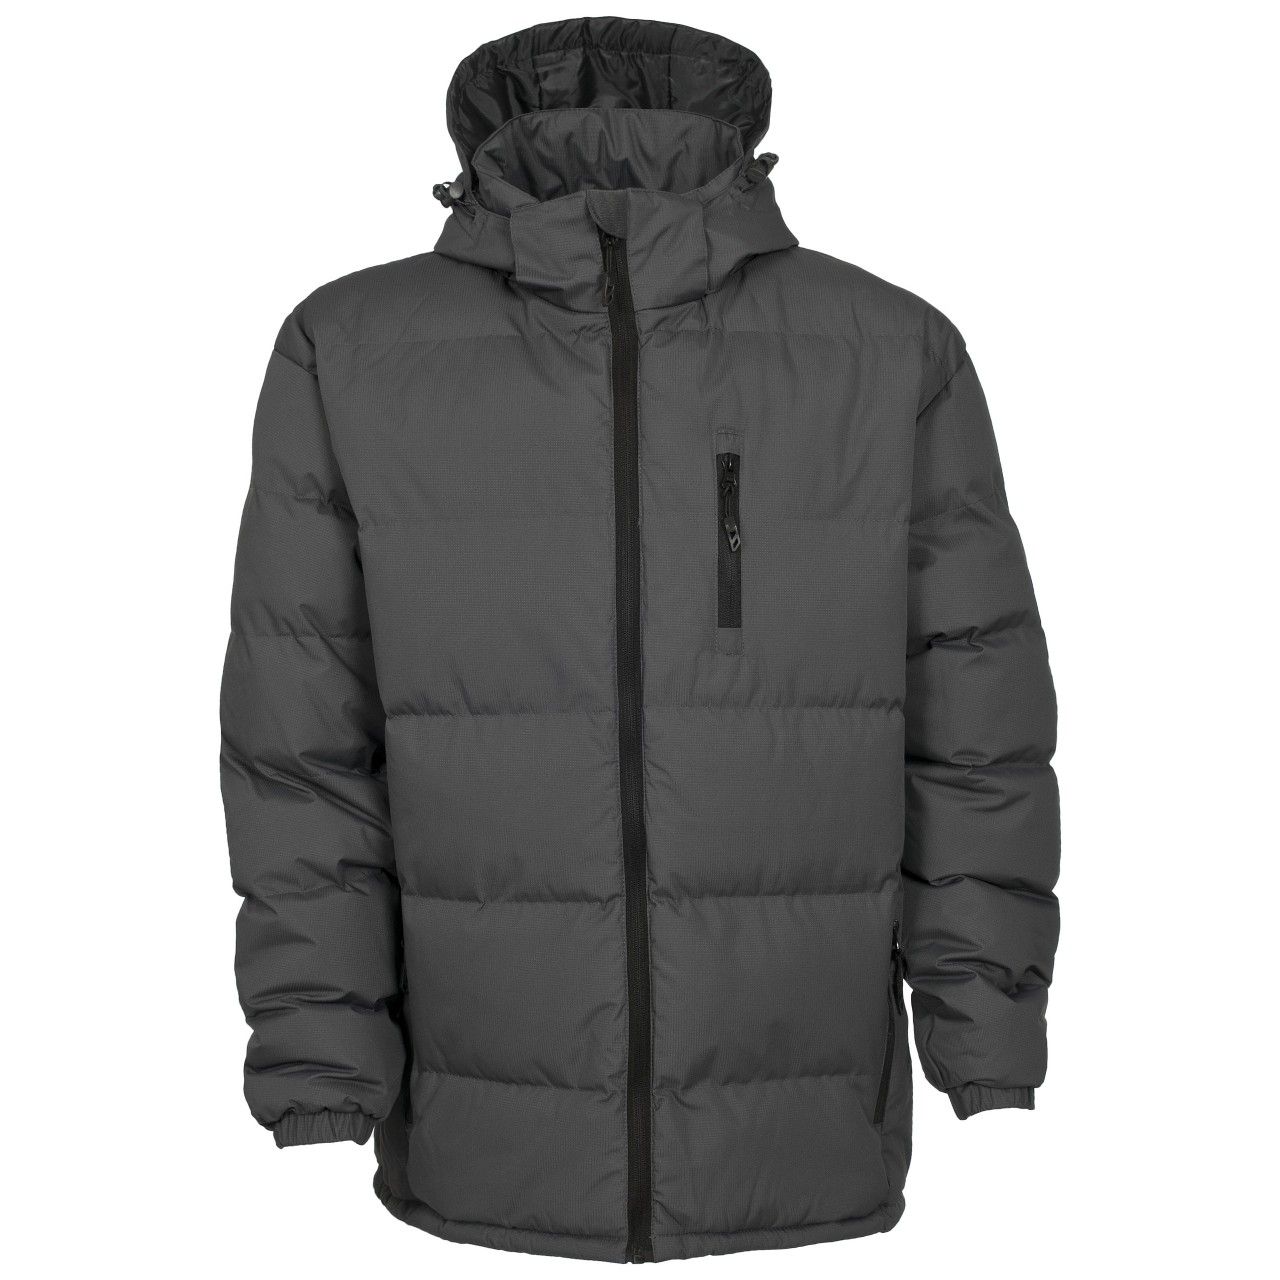 Padded jacket. Adjustable zip off hood. 3 Low profile zipped pockets. Low profile centre front zip. Elasticated cuffs. Down-style look with a polyester fill for great value. 100% Polyester.